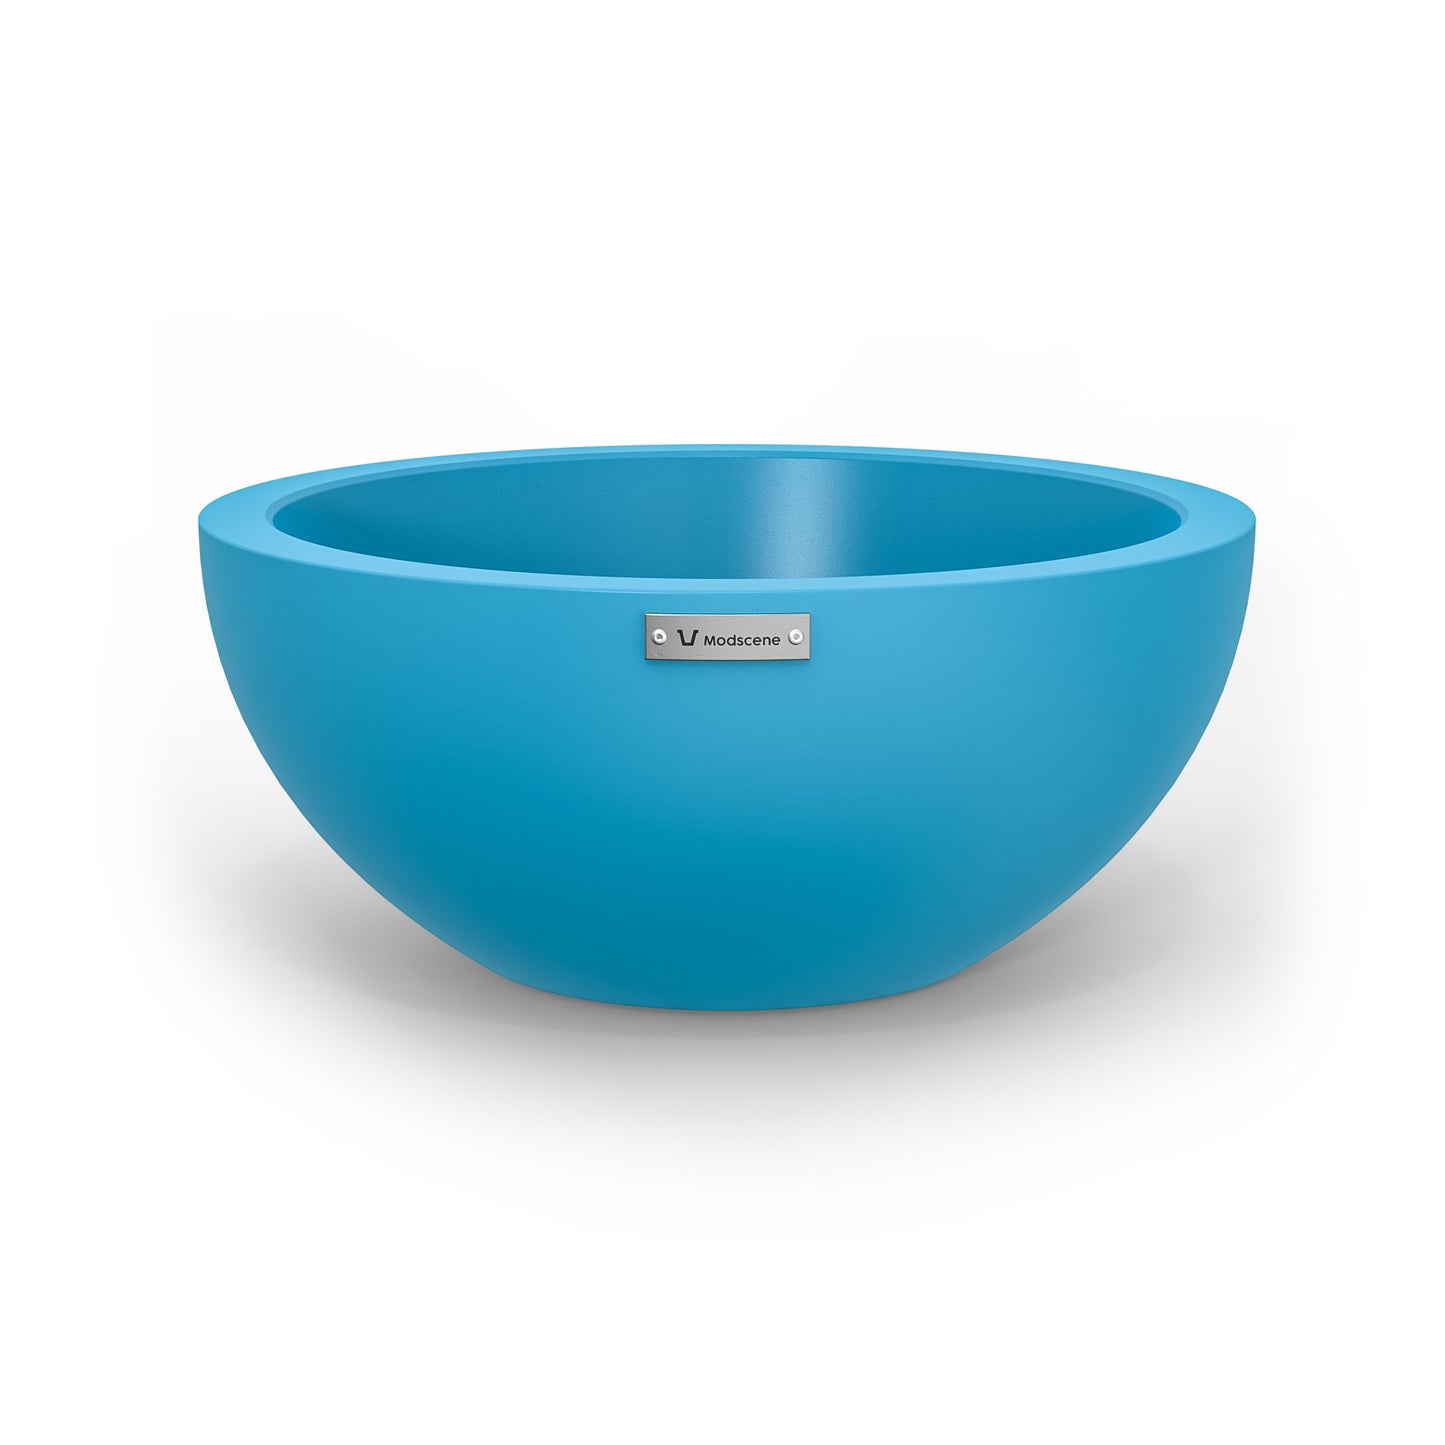 A small planter bowl in blue made by Modscene. Australian planters.